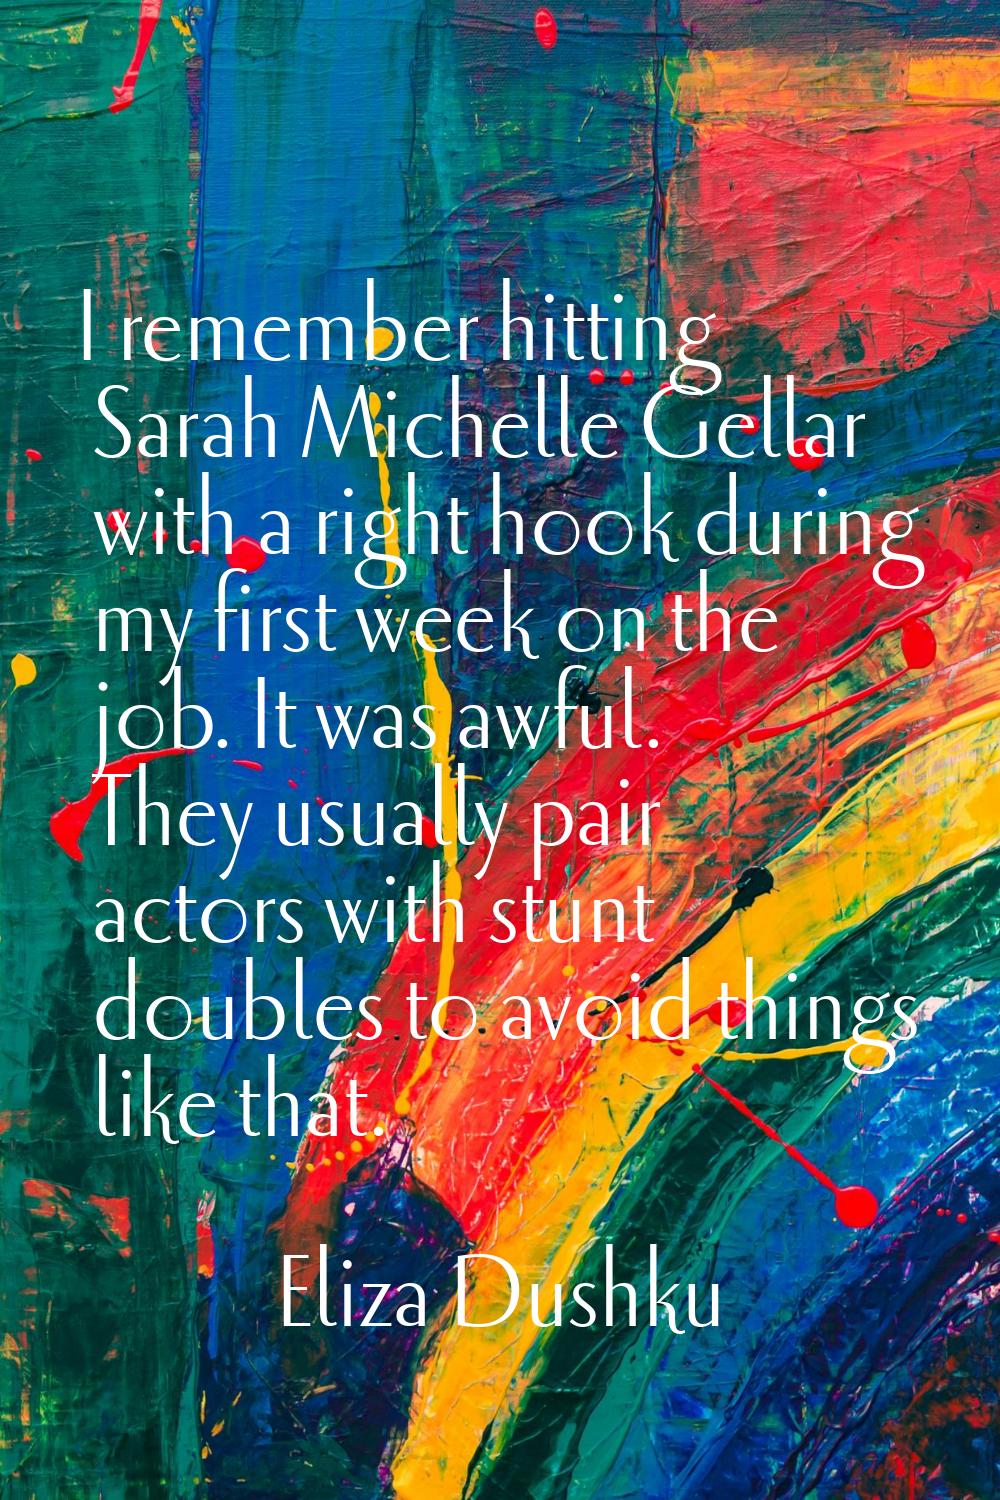 I remember hitting Sarah Michelle Gellar with a right hook during my first week on the job. It was 